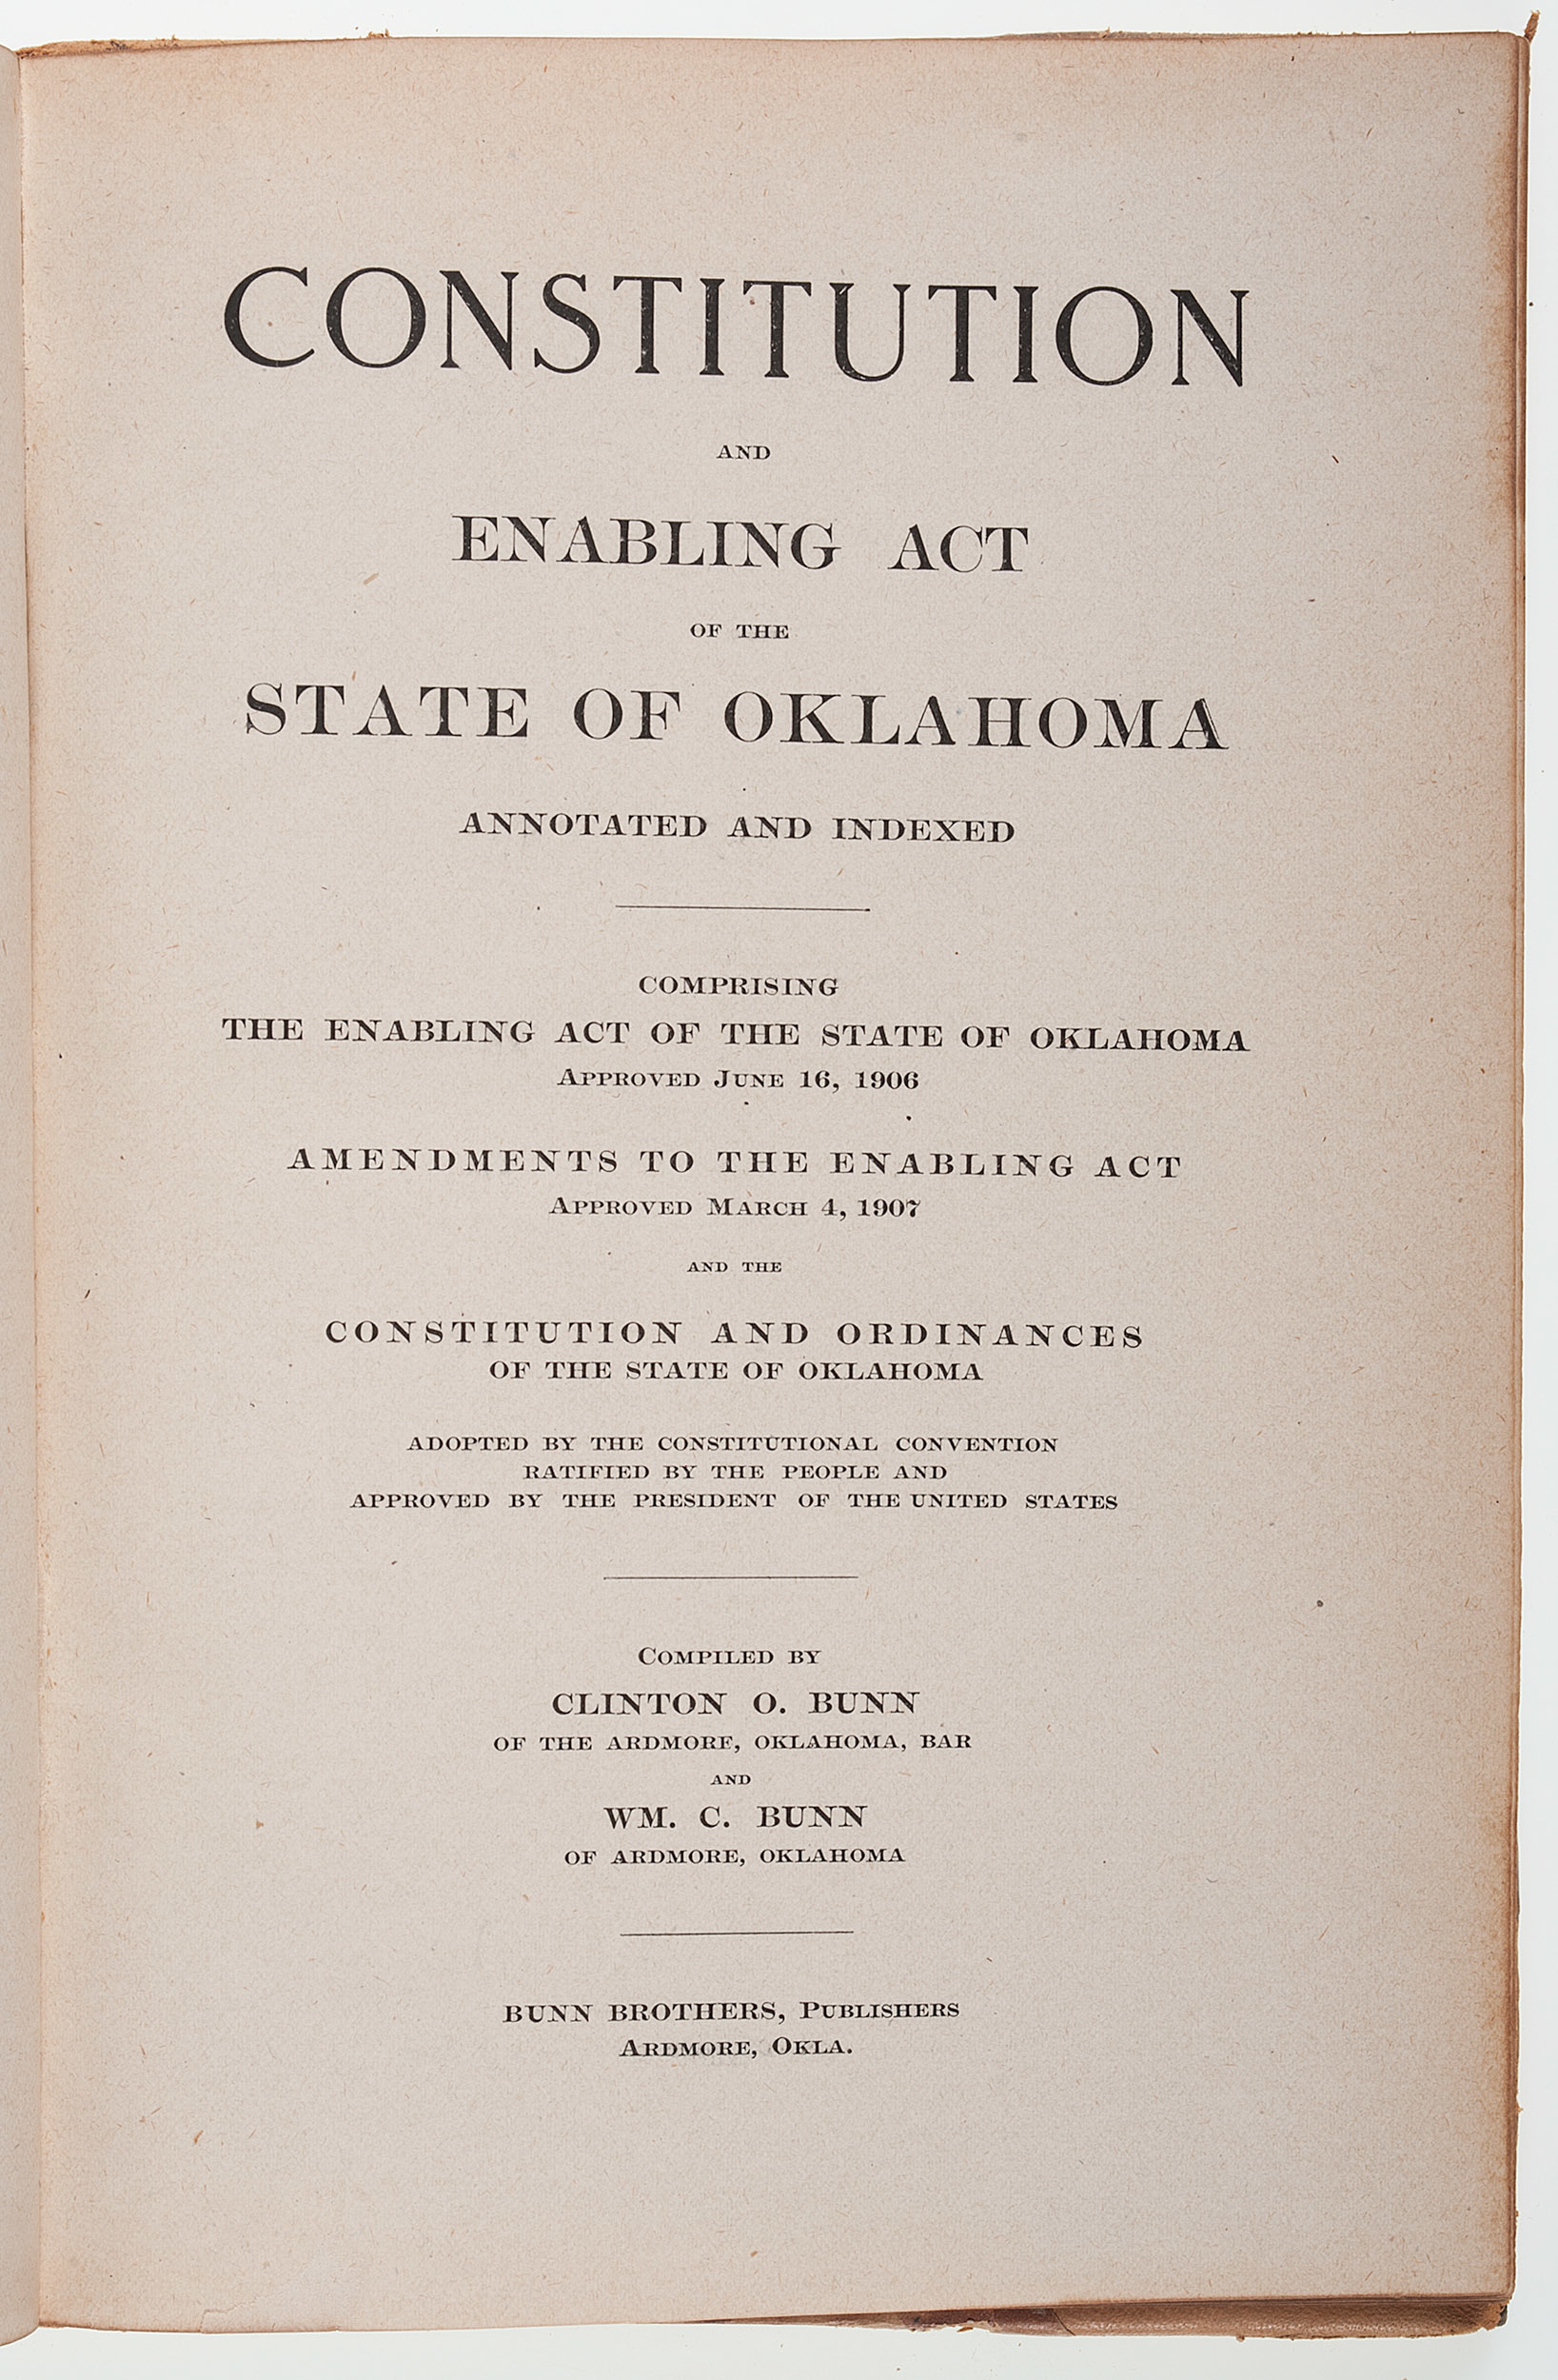 Western Americana - Law] Early Printing of Oklahoma Constitution -  Published in Ardmore in the Year of Ratification | Cowan's Auction House:  The Midwest's Most Trusted Auction House / Antiques / Fine Art / Art  Appraisals